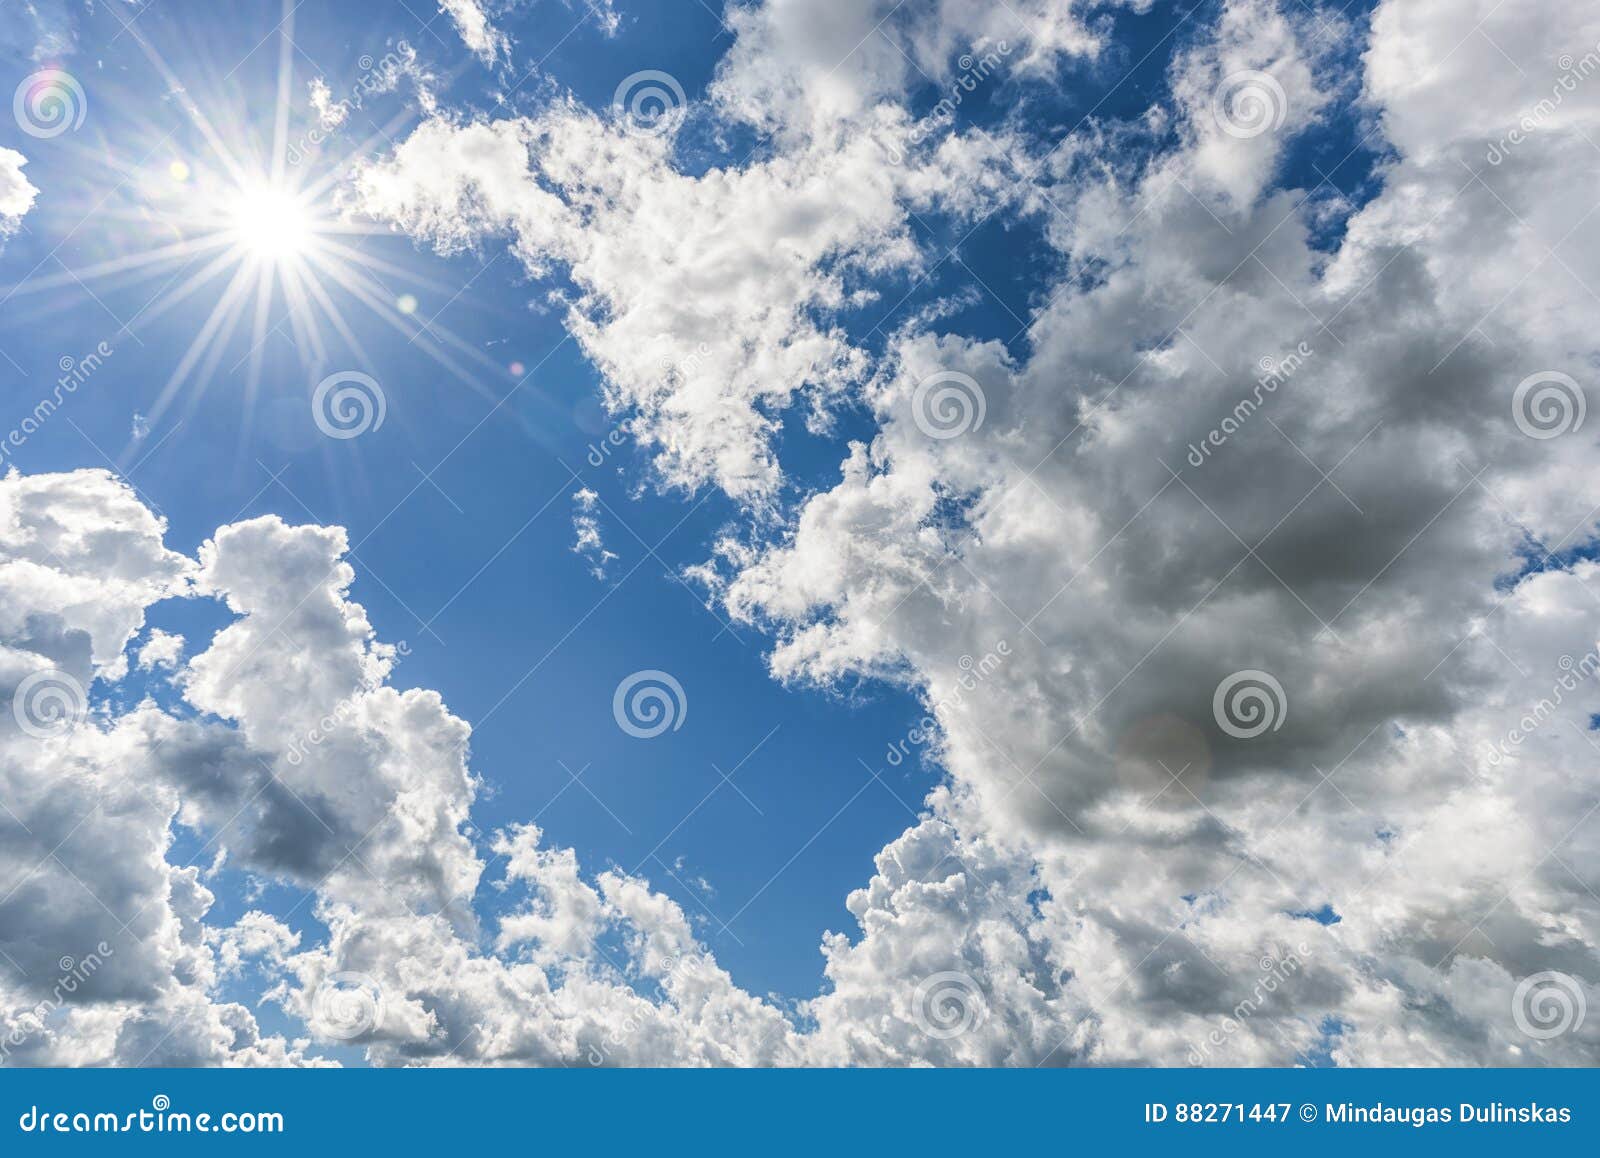 cloudy blue sky as background. direct sunlight, sun above the clouds